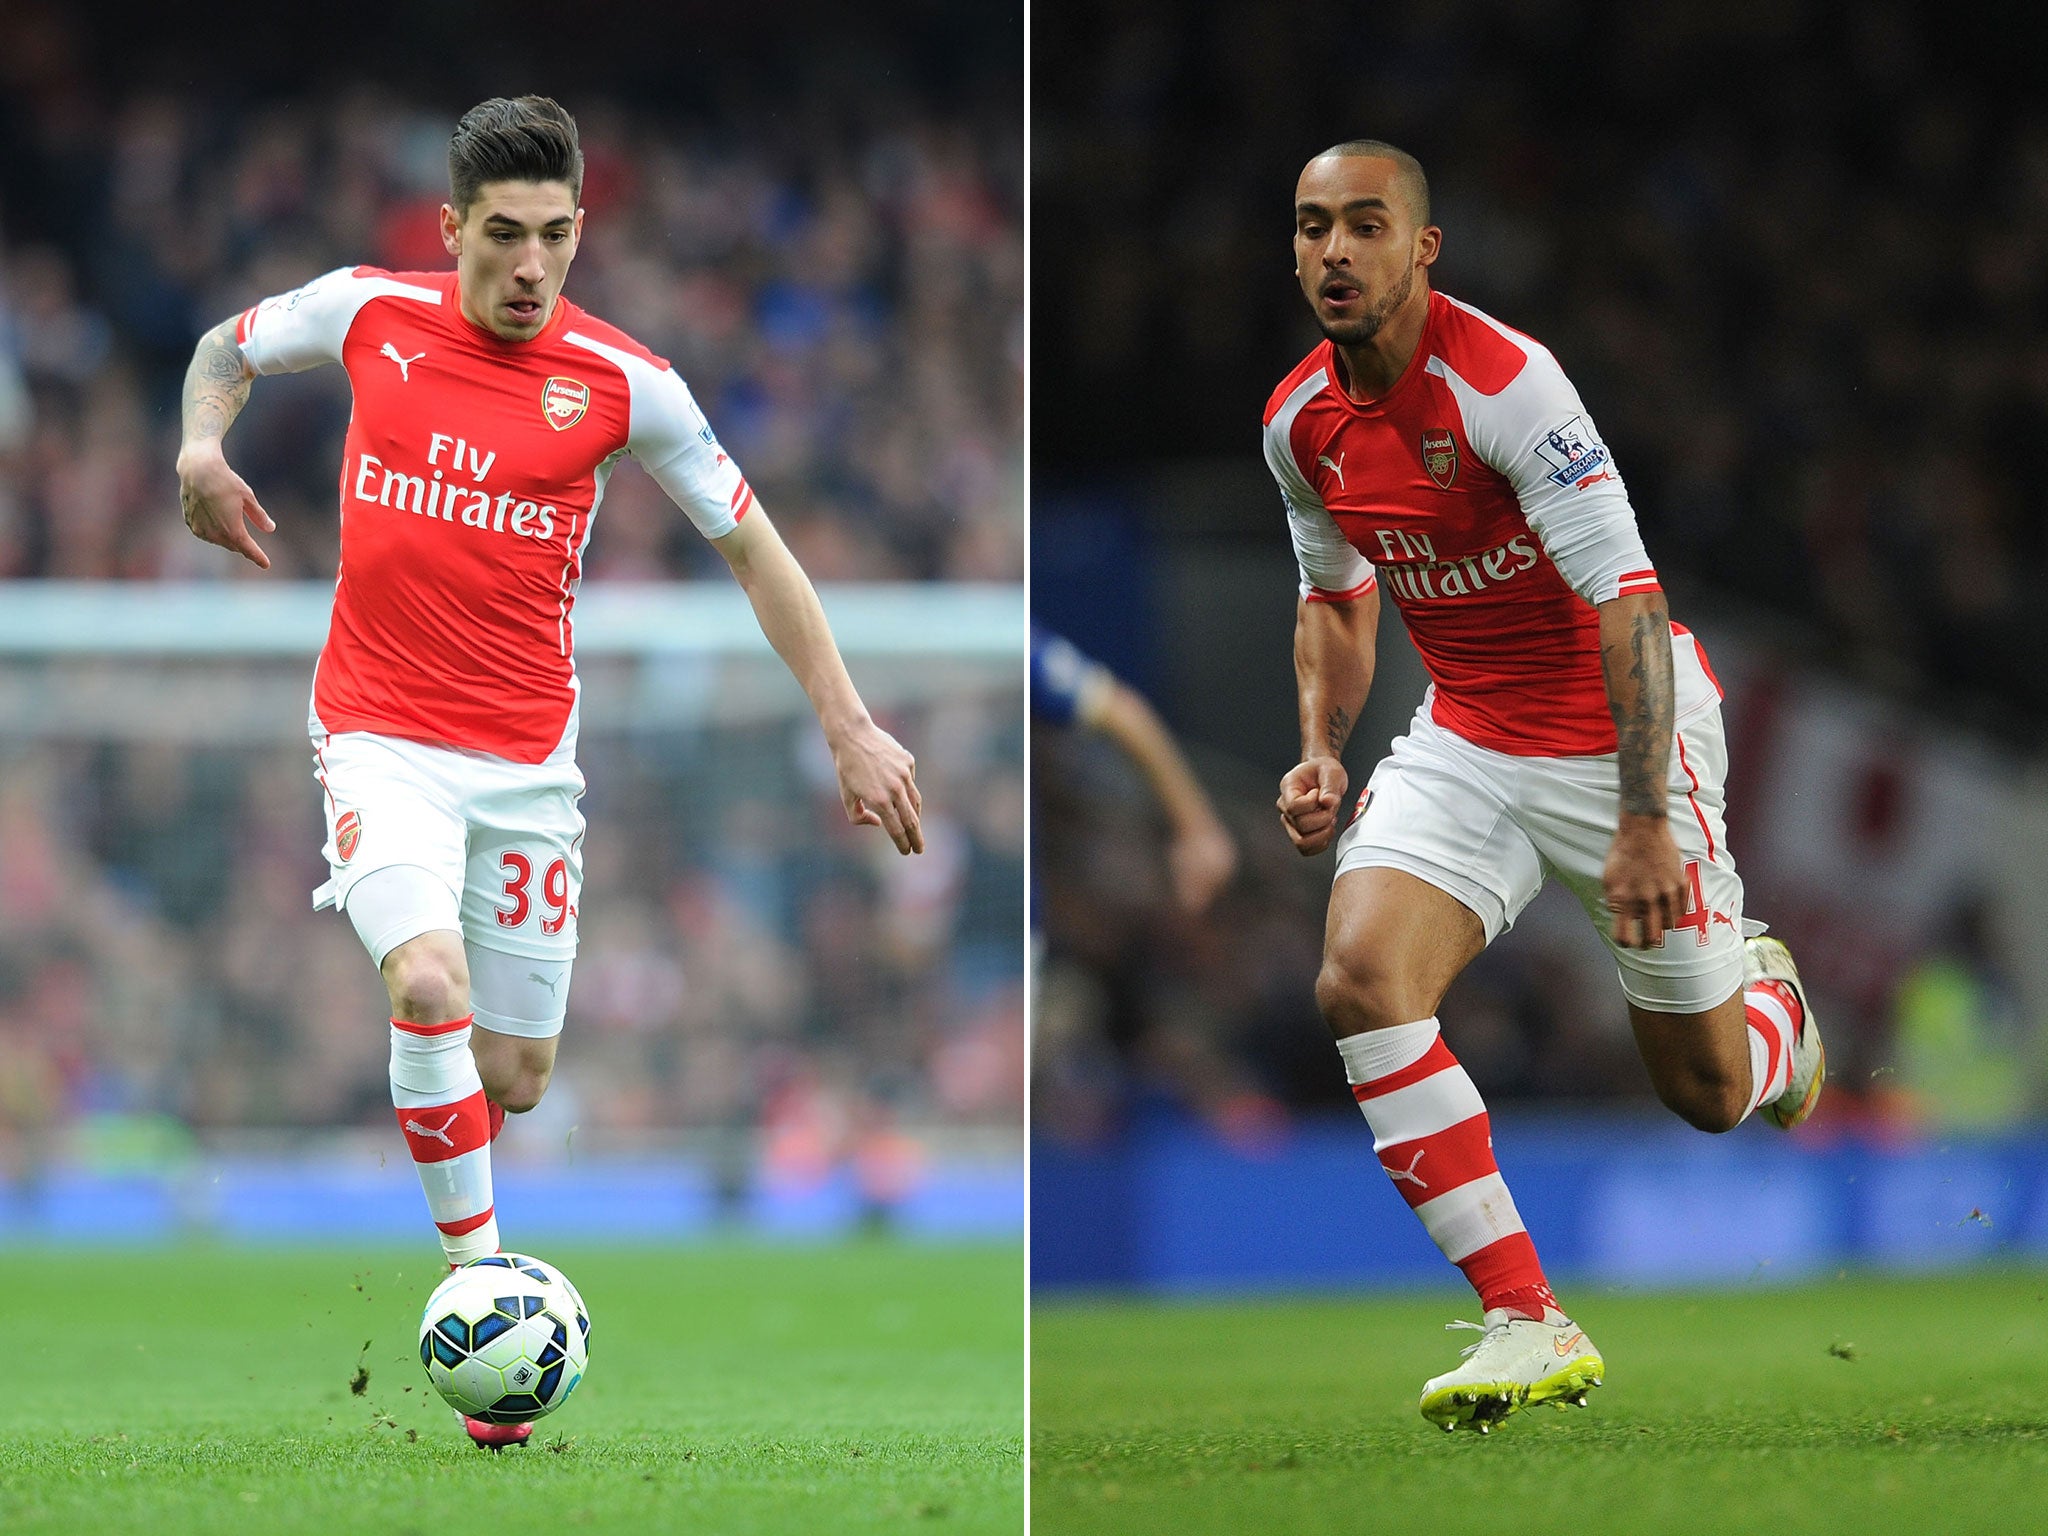 Hector Bellerin (left) and Theo Walcott (right)